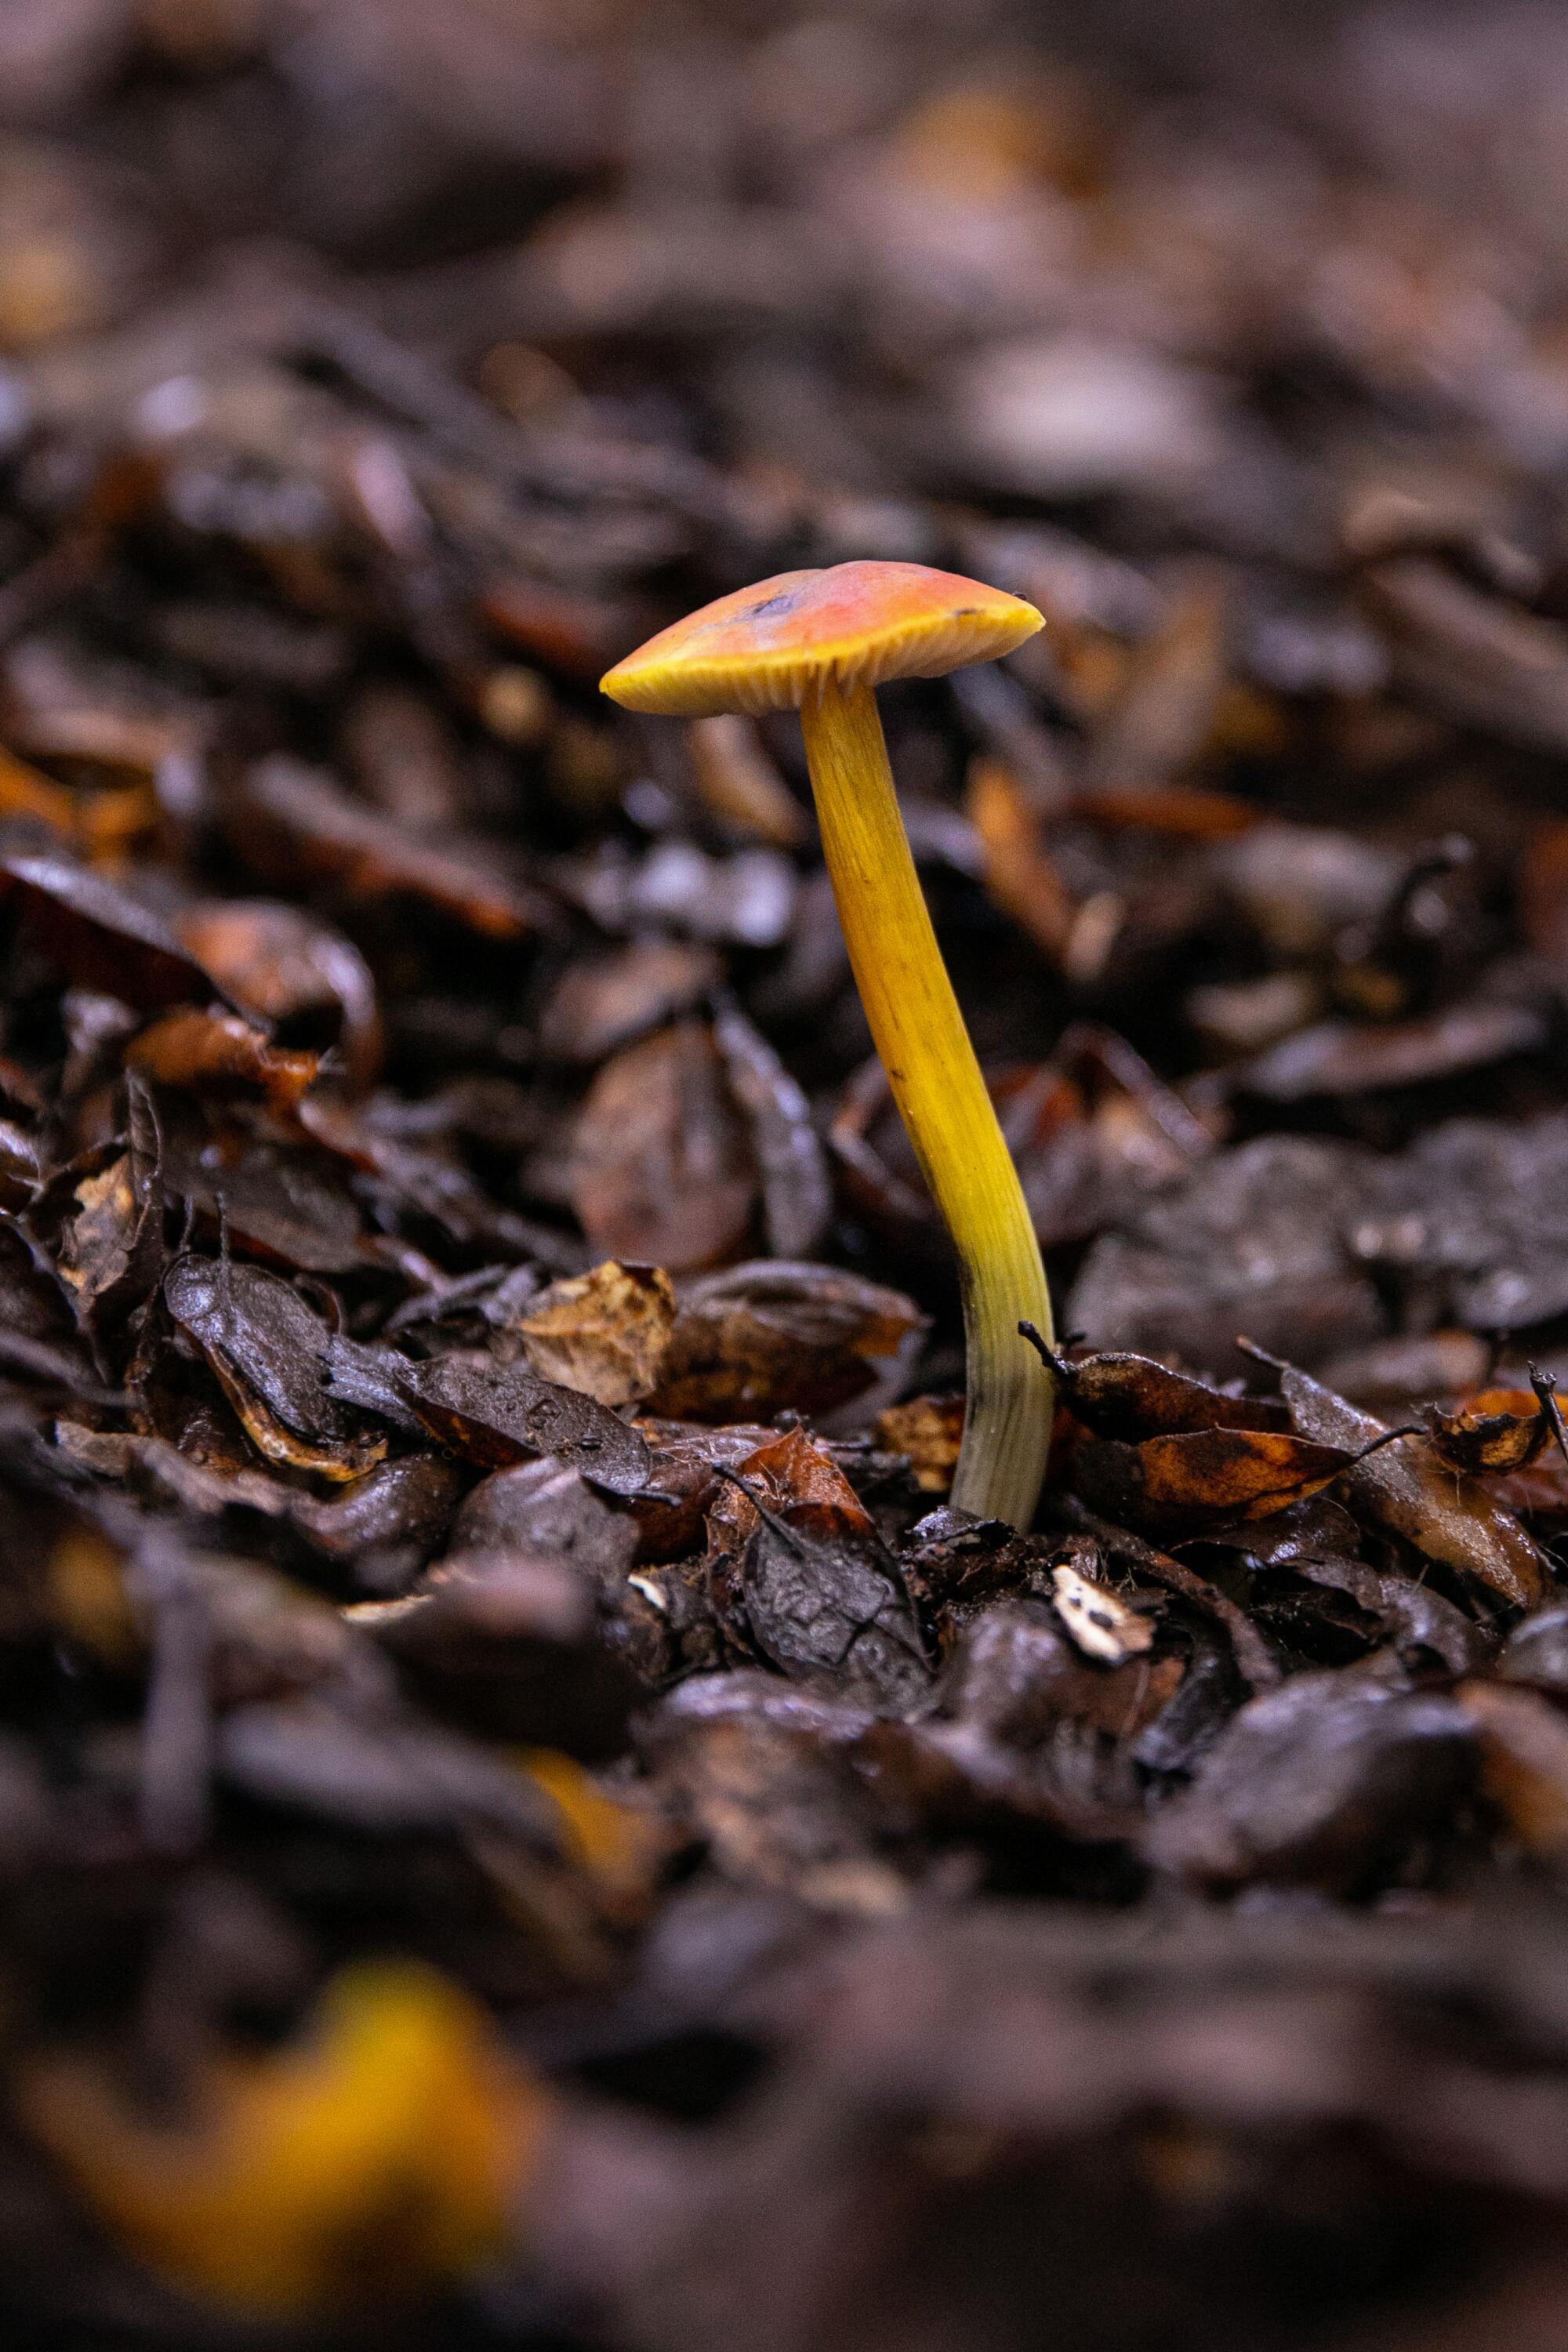 A small mushroom growing from the ground